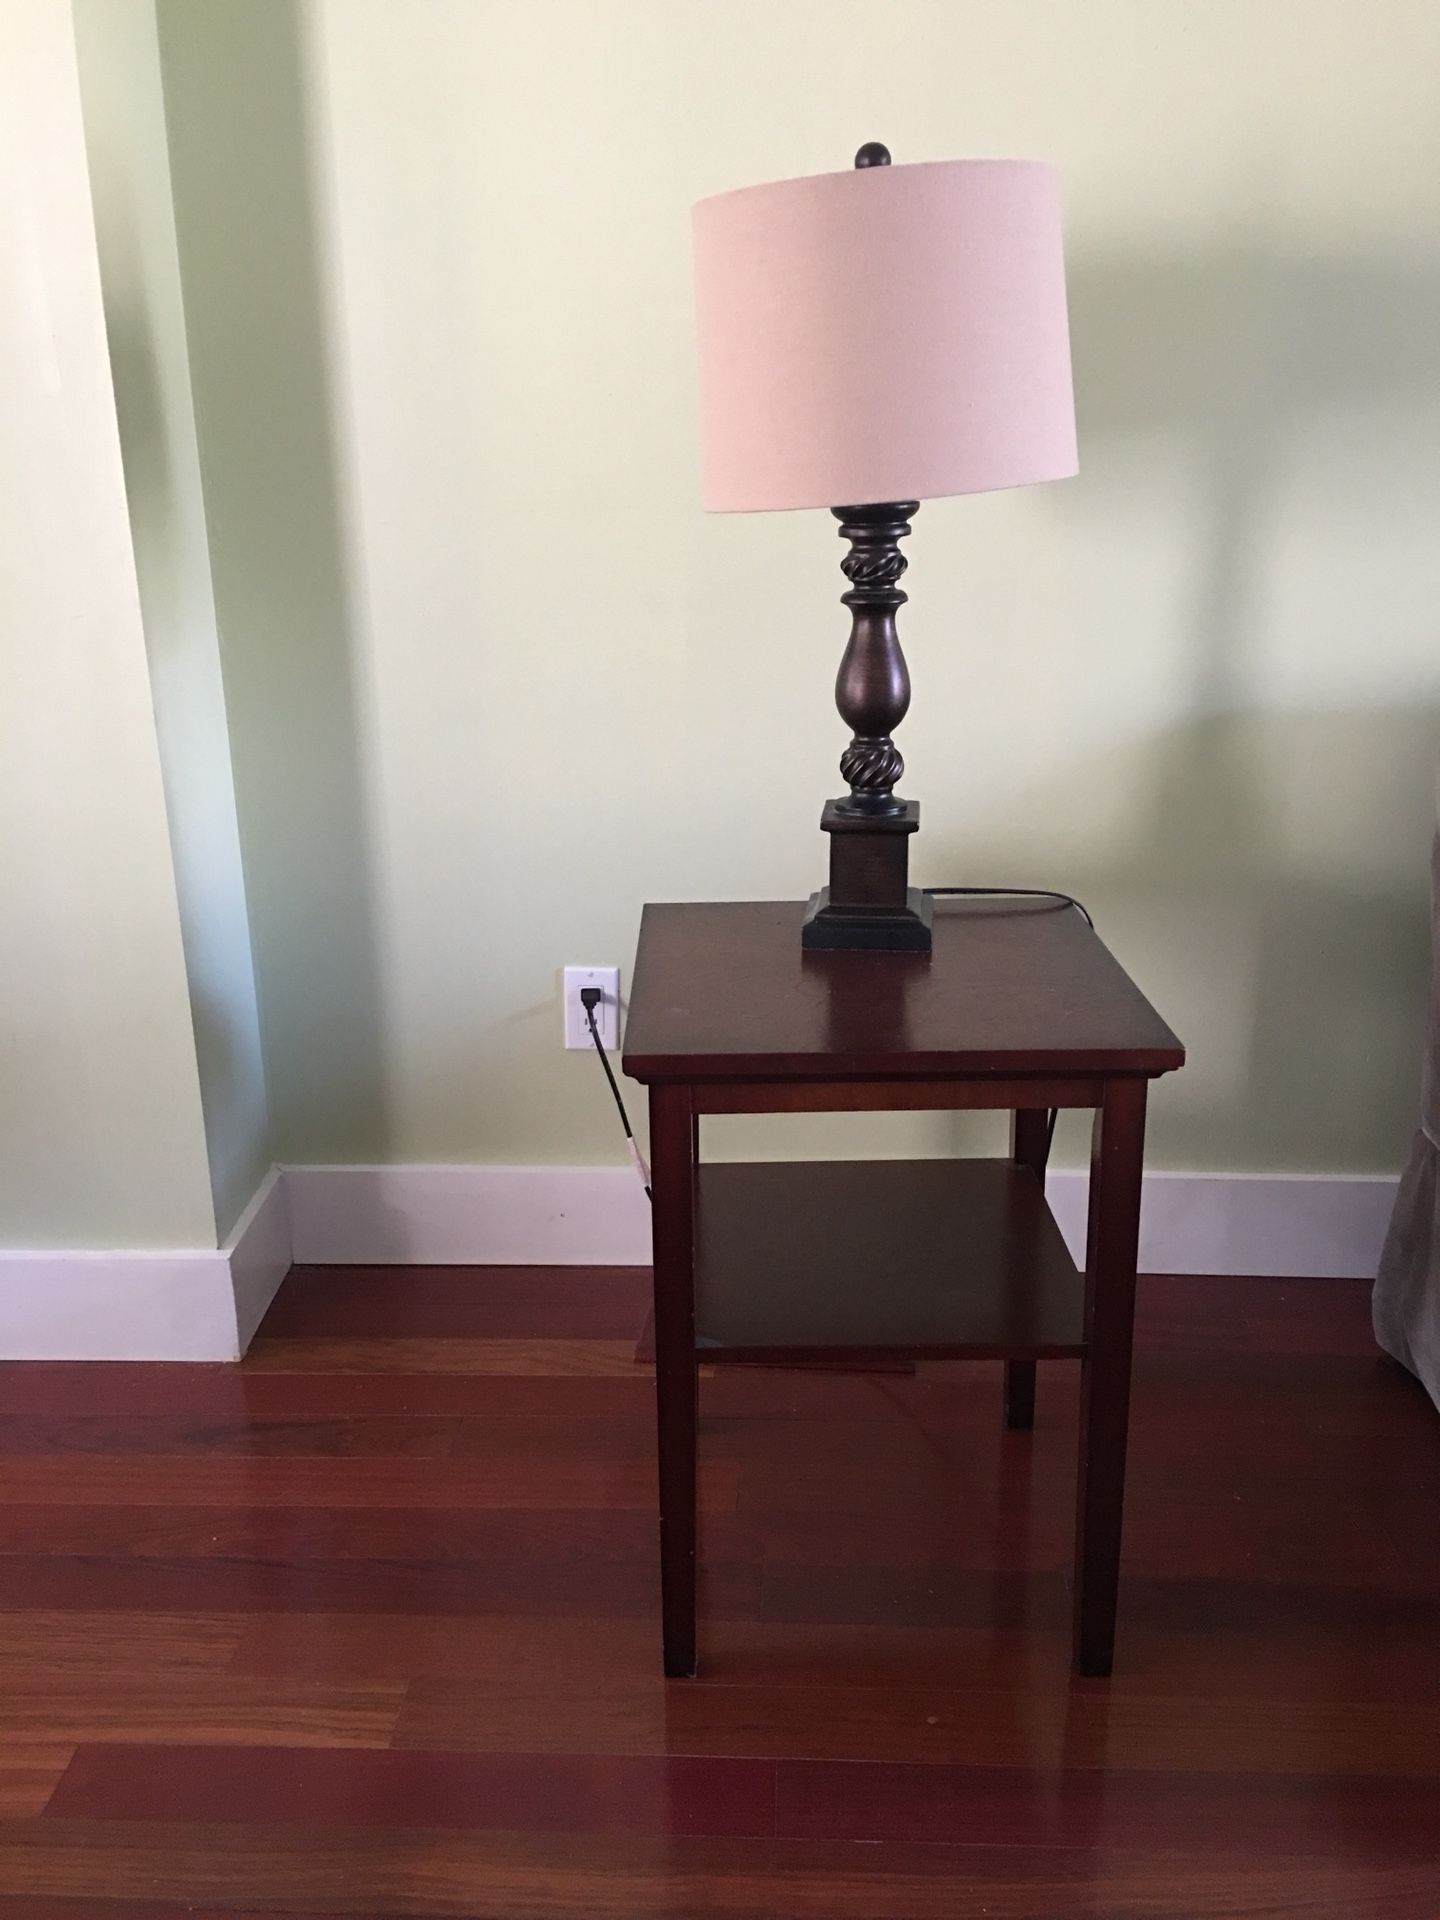 Two end tables and lamps